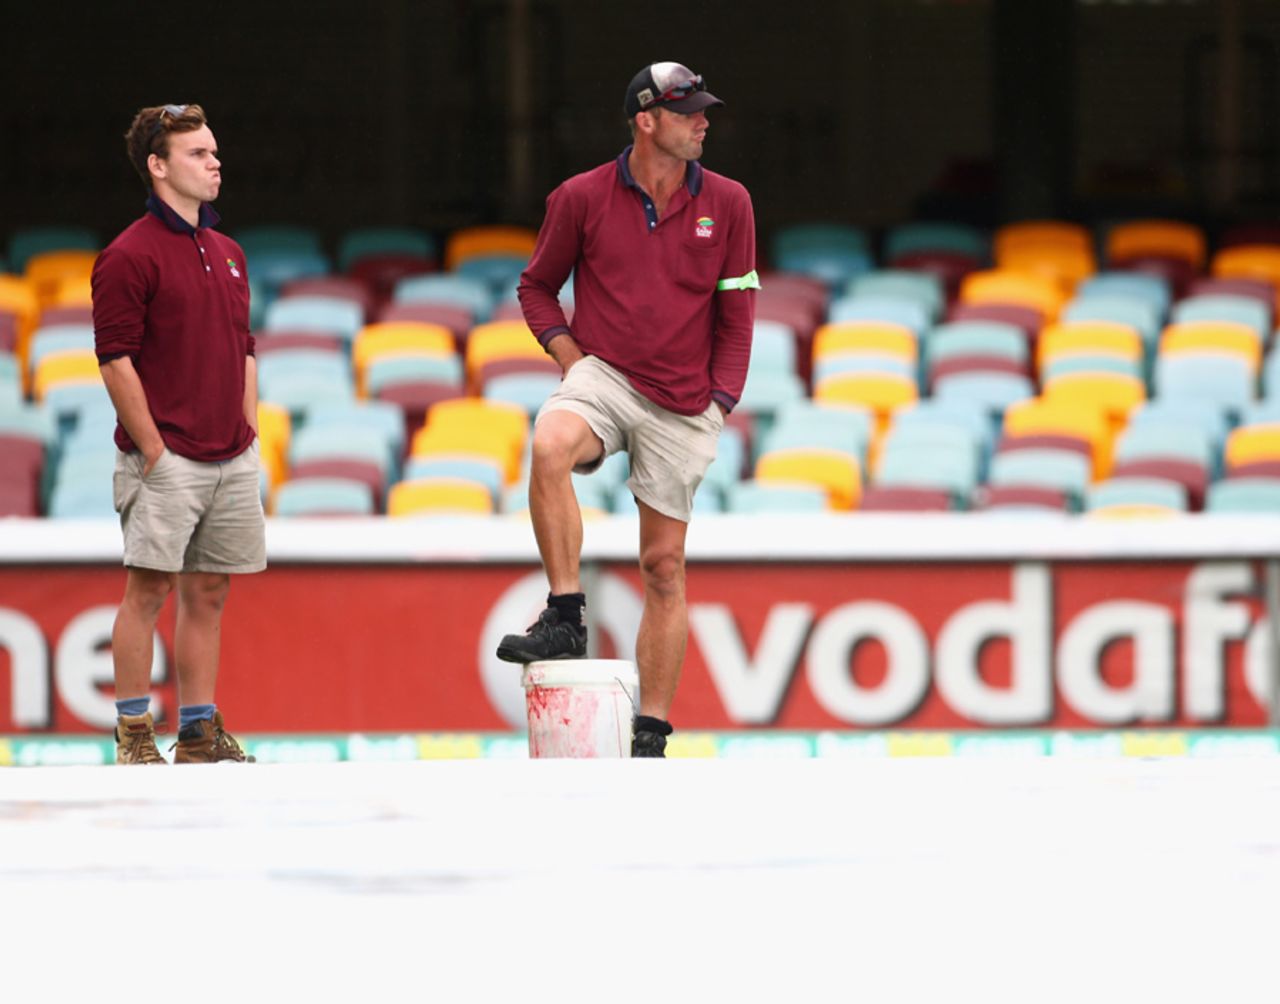 The groundstaff wait for a decision on the play, Australia v South Africa, 1st Test, Brisbane, 2nd day, November 10, 2012